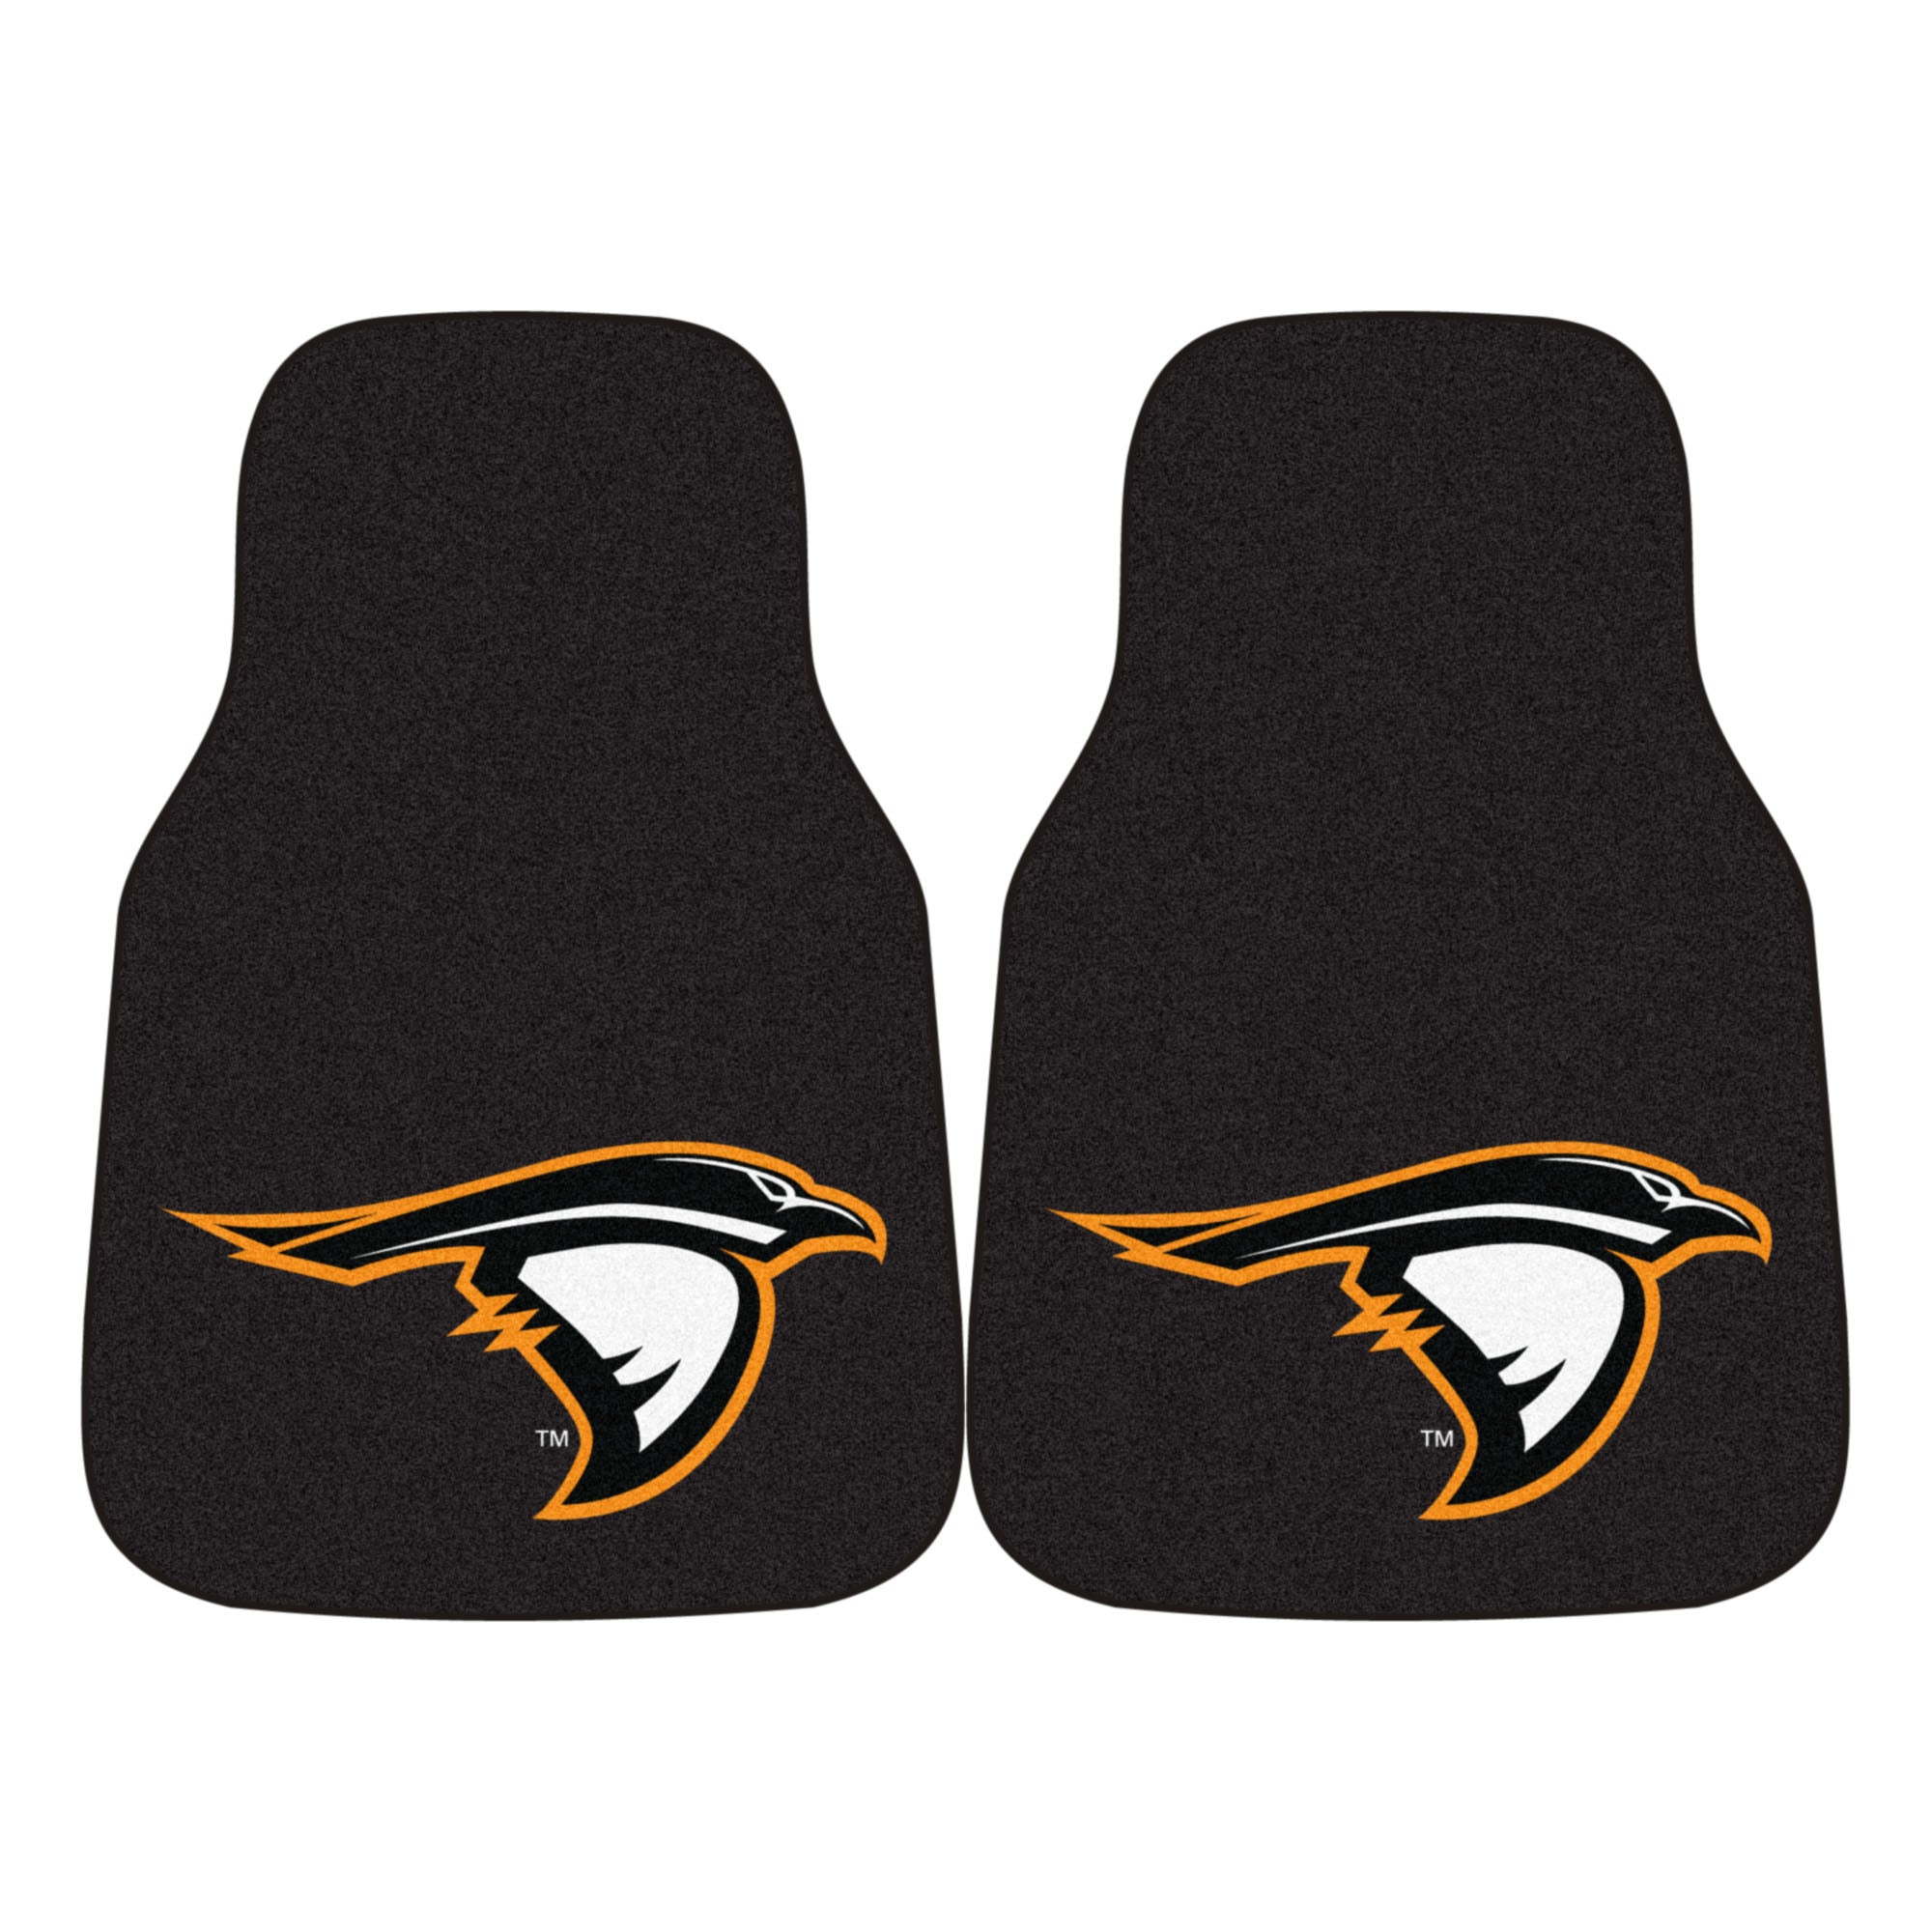 Sports Licensing Solutions, Anderson University (IN) Carpet Car Mat Set - 2 Pieces